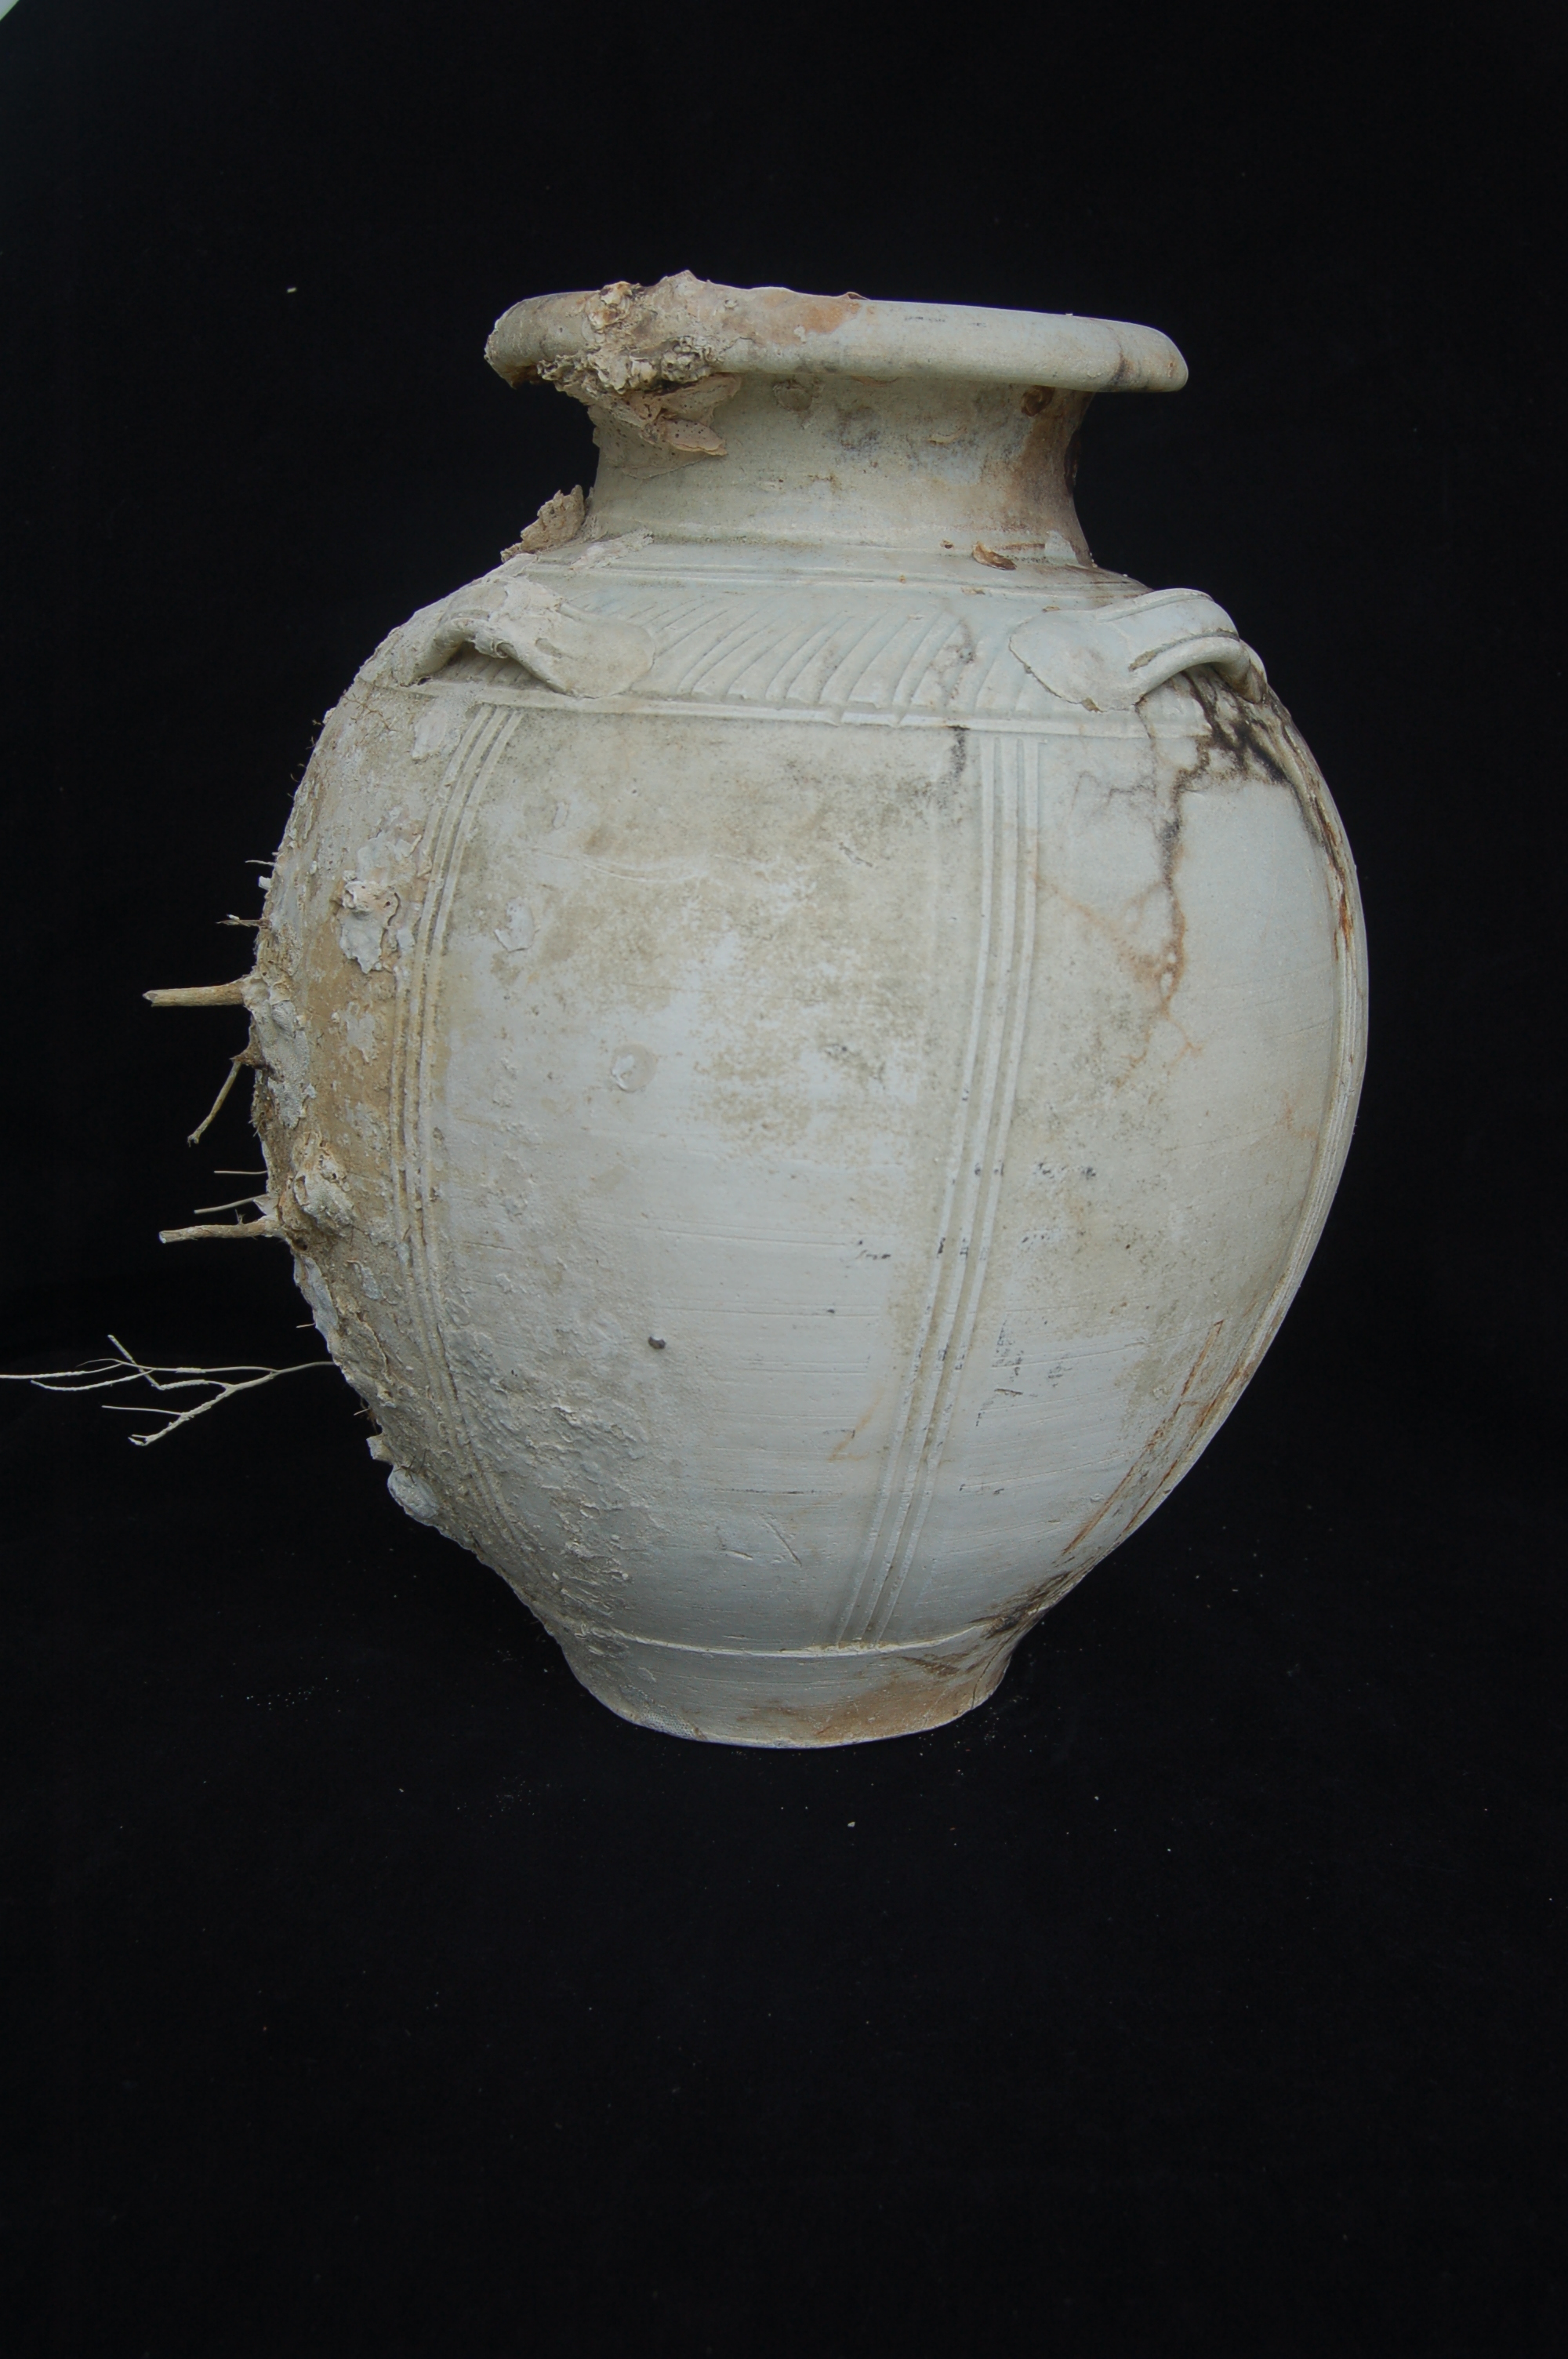 Decorated jar. Gently flared neck with a folded mouth-rim, four lug-handles on the shoulder, and a carved foot-ring. The body is divided into eight panels by triplets of combed vertical lines, while the shoulder is circled by spiral striations. Similar to the previous example although not as refined. Diameter 22 cm, height 30 cm.